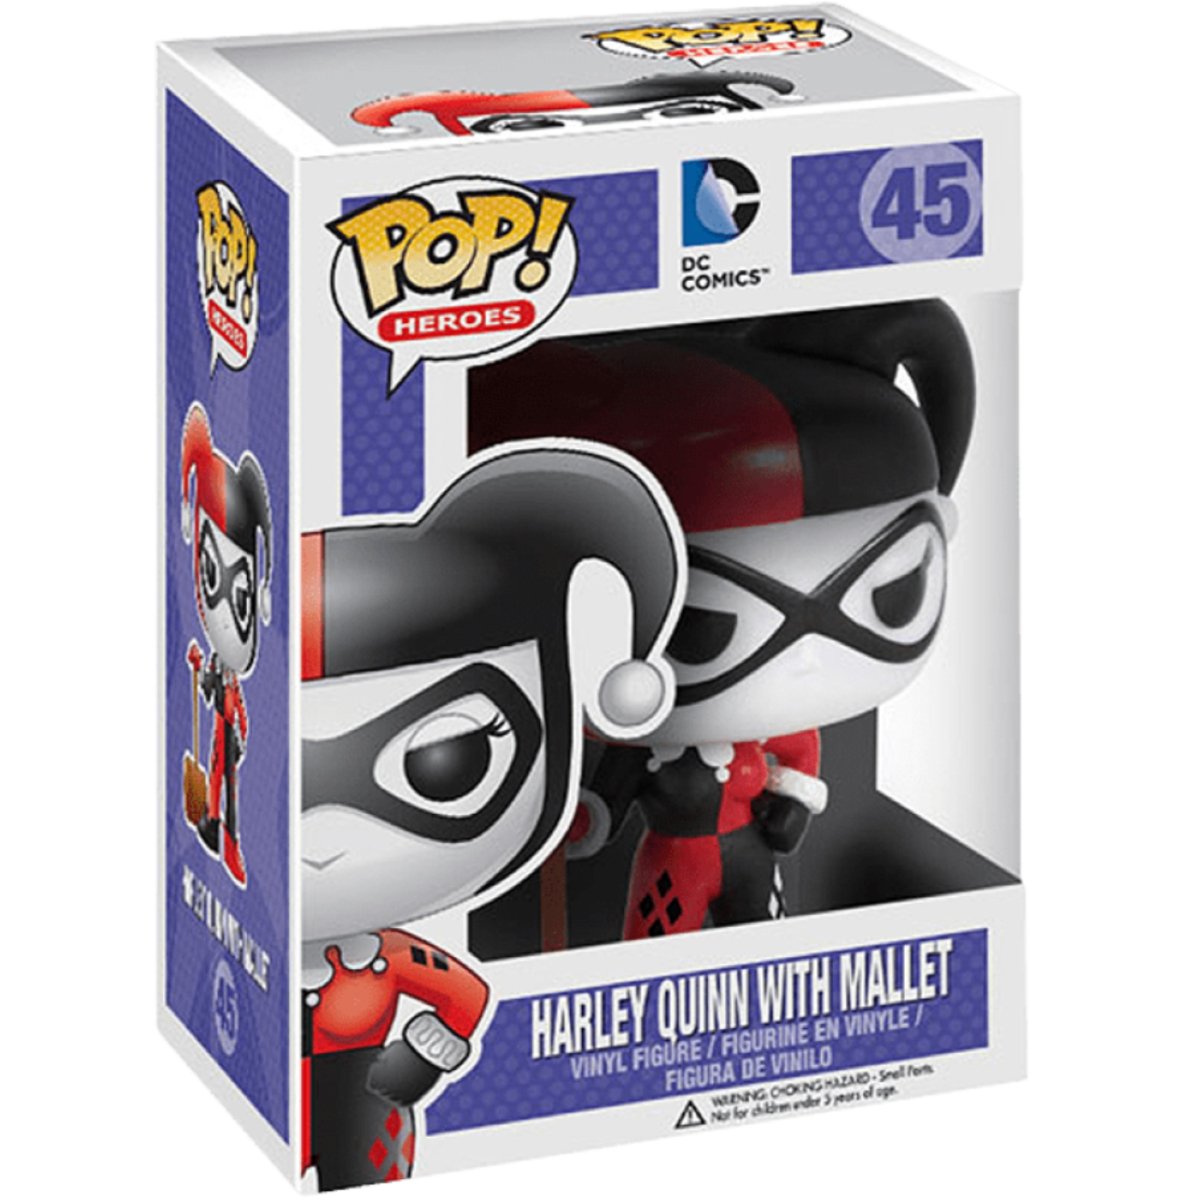 DC Super Heroes - Harley Quinn with Mallet #45 - Funko Pop! Vinyl DC - Persona Toys